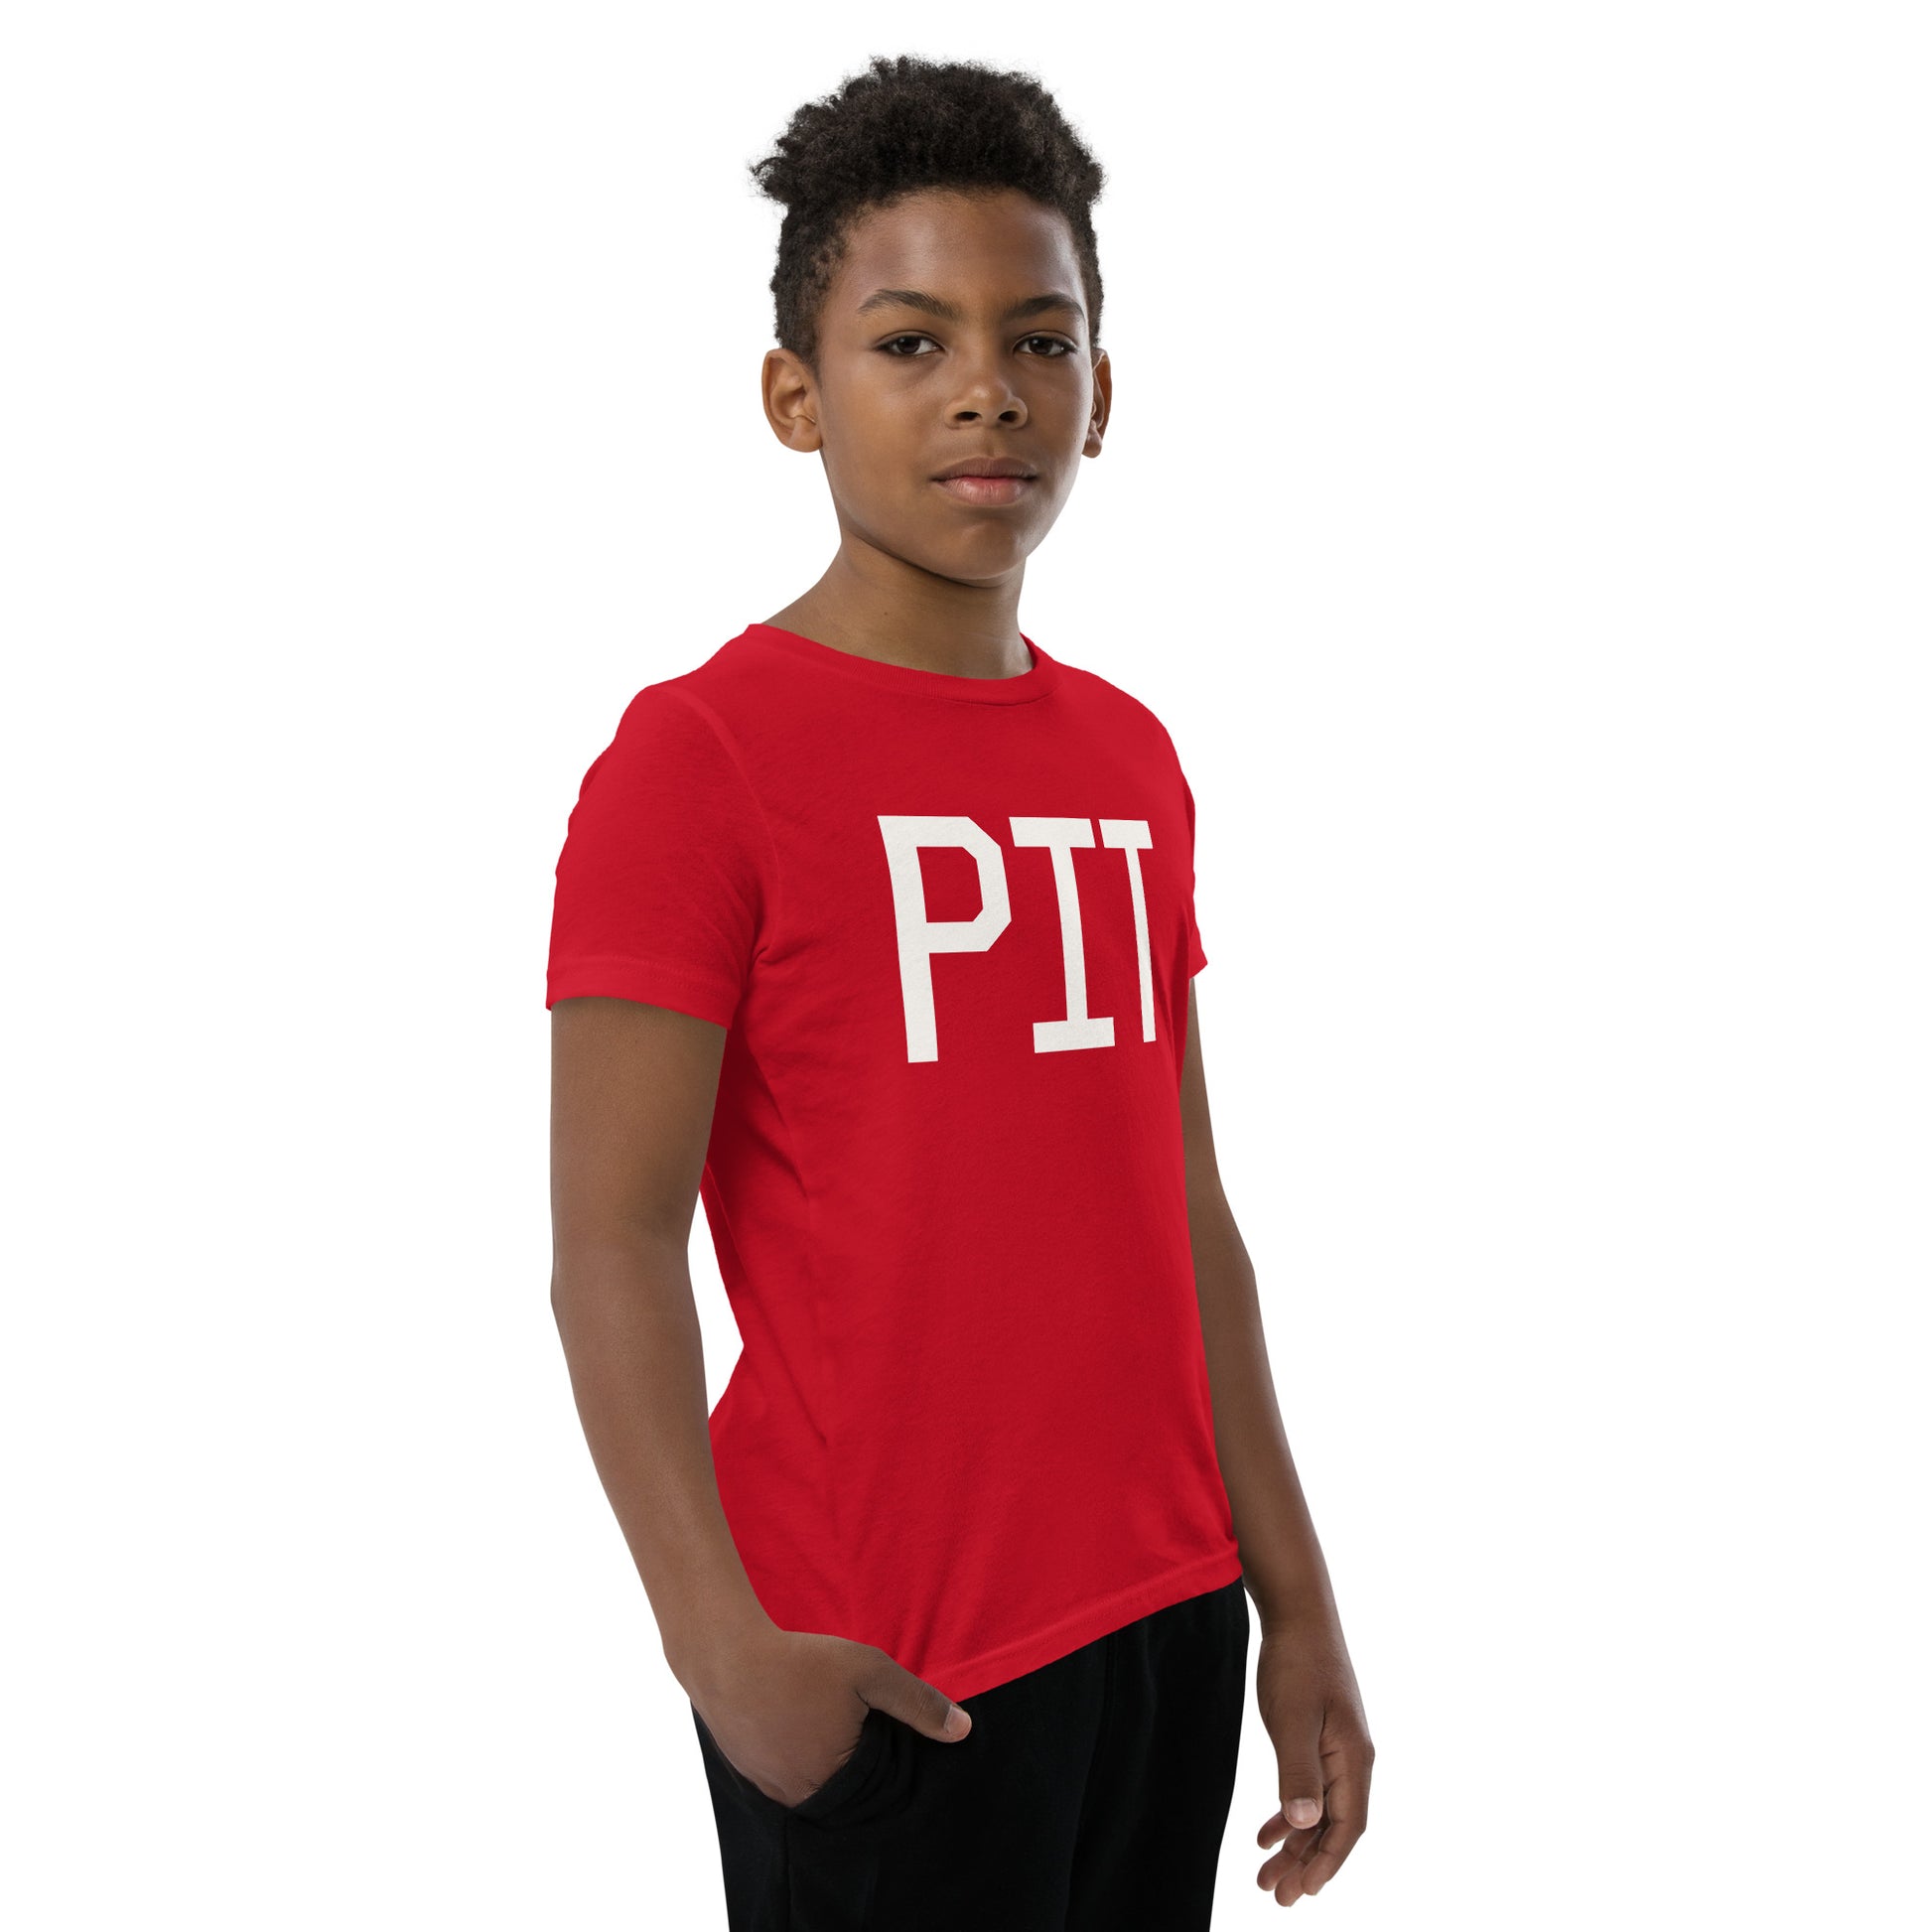 Kid's T-Shirt - White Graphic • PIT Pittsburgh • YHM Designs - Image 10